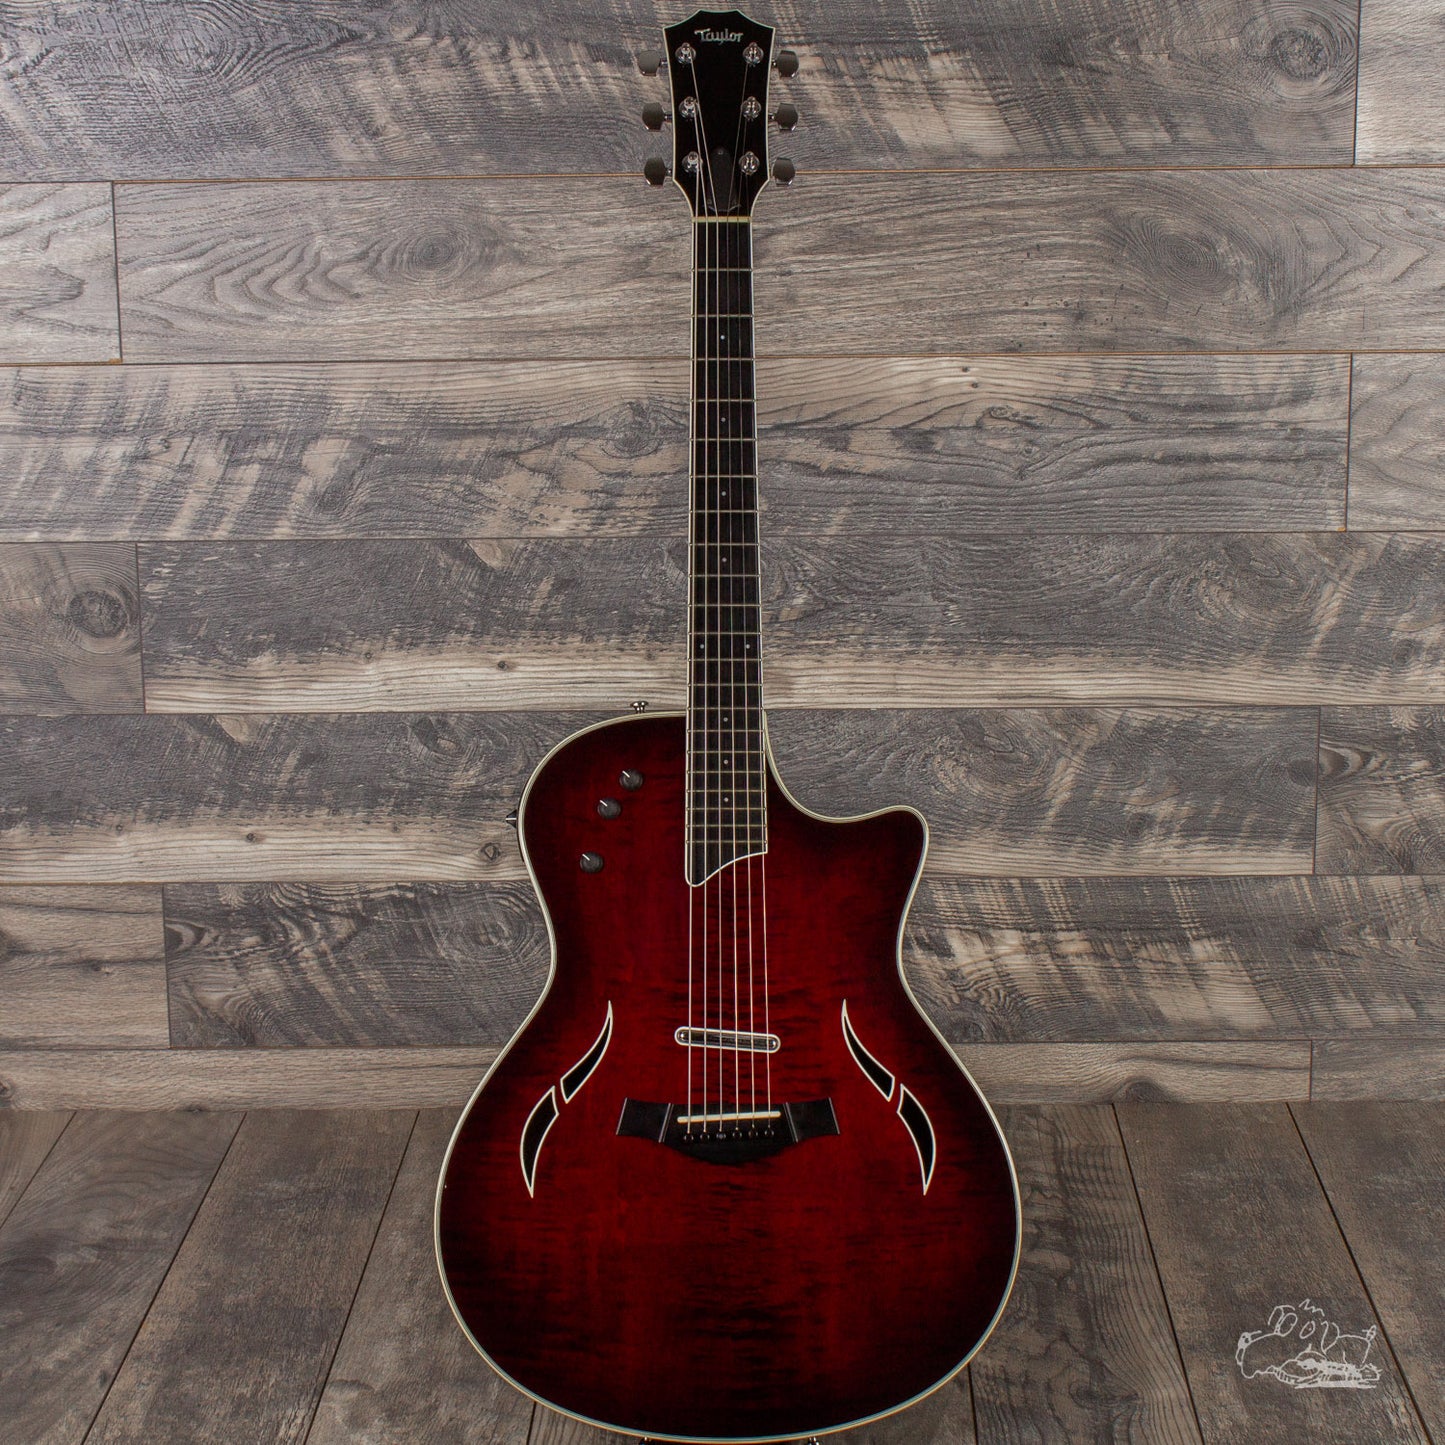 2006 Taylor T5-S1 Semi-Hollow Body Electric Guitar